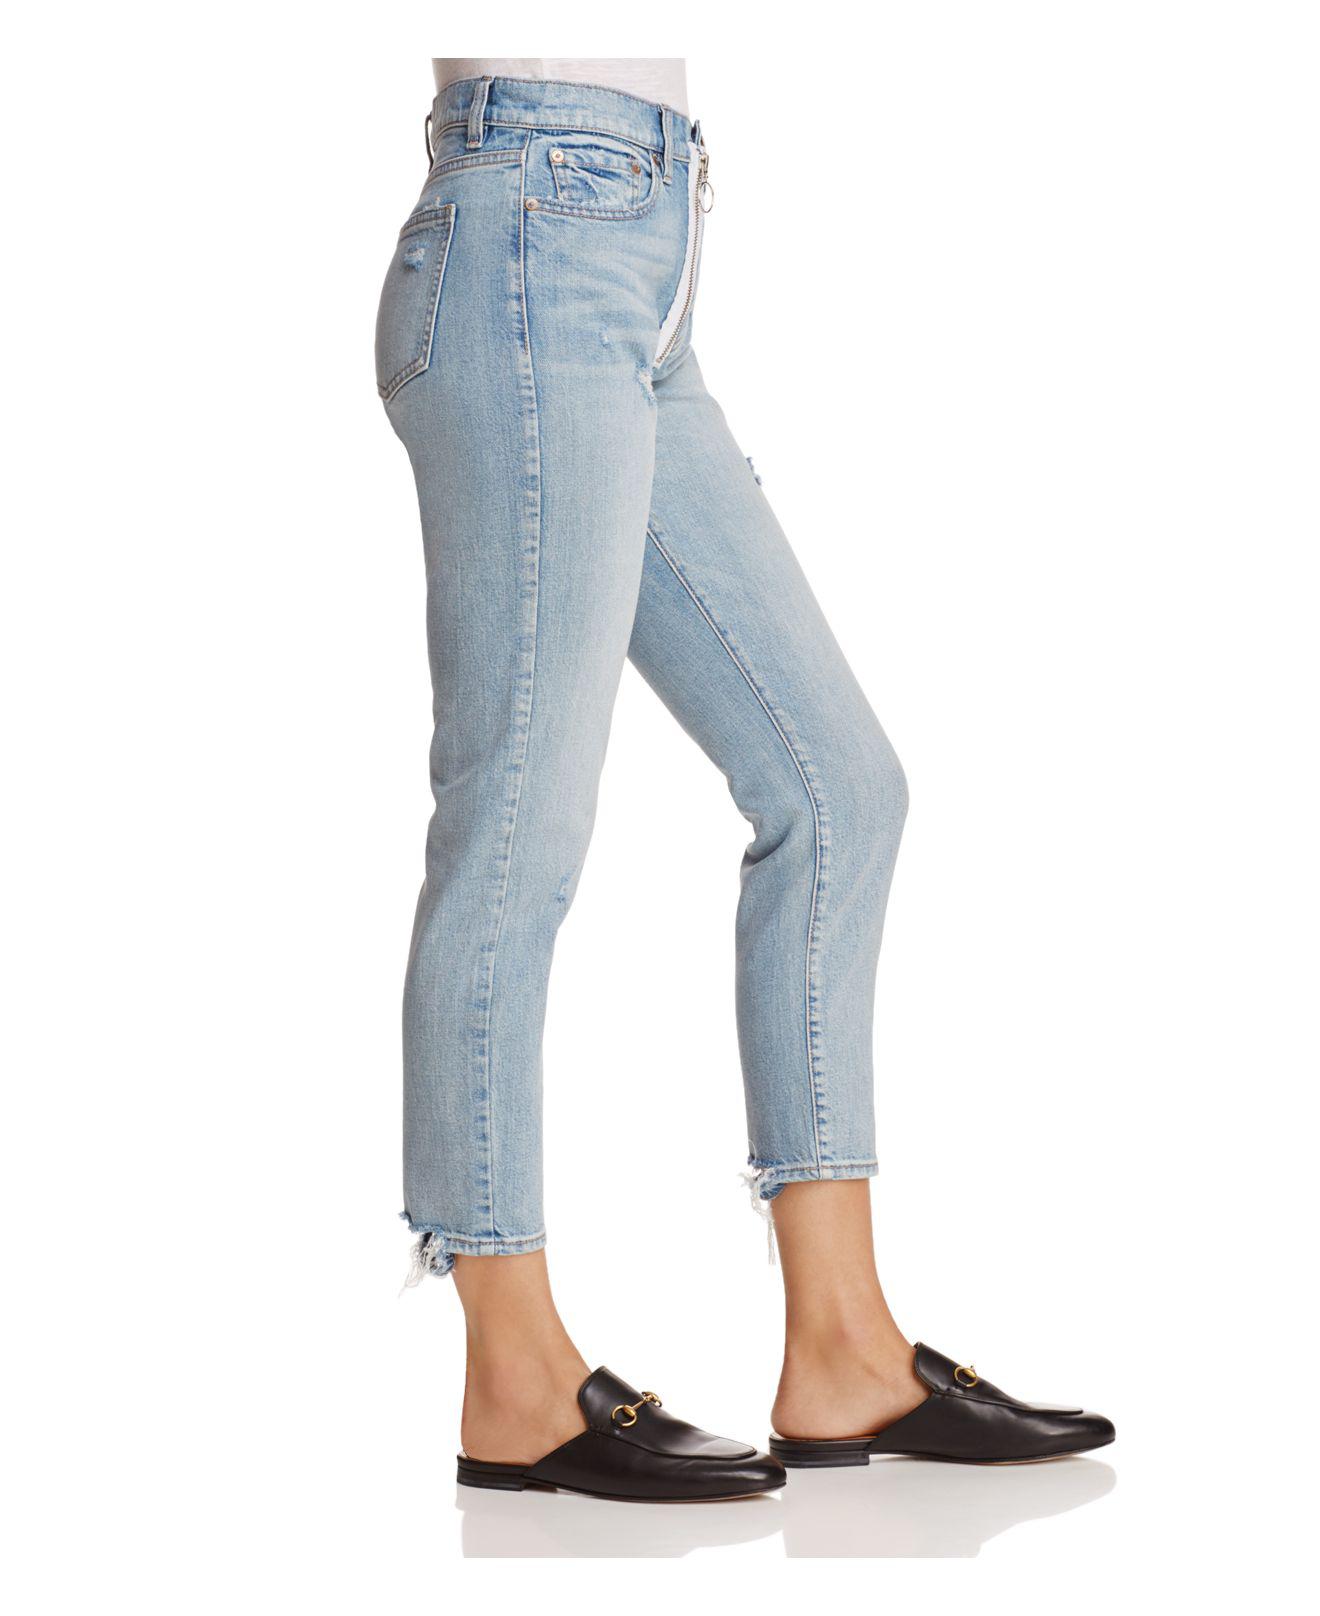 Lyst - Pistola Nico High-rise Exposed Zip Skinny Jeans In Lexington Lux ...